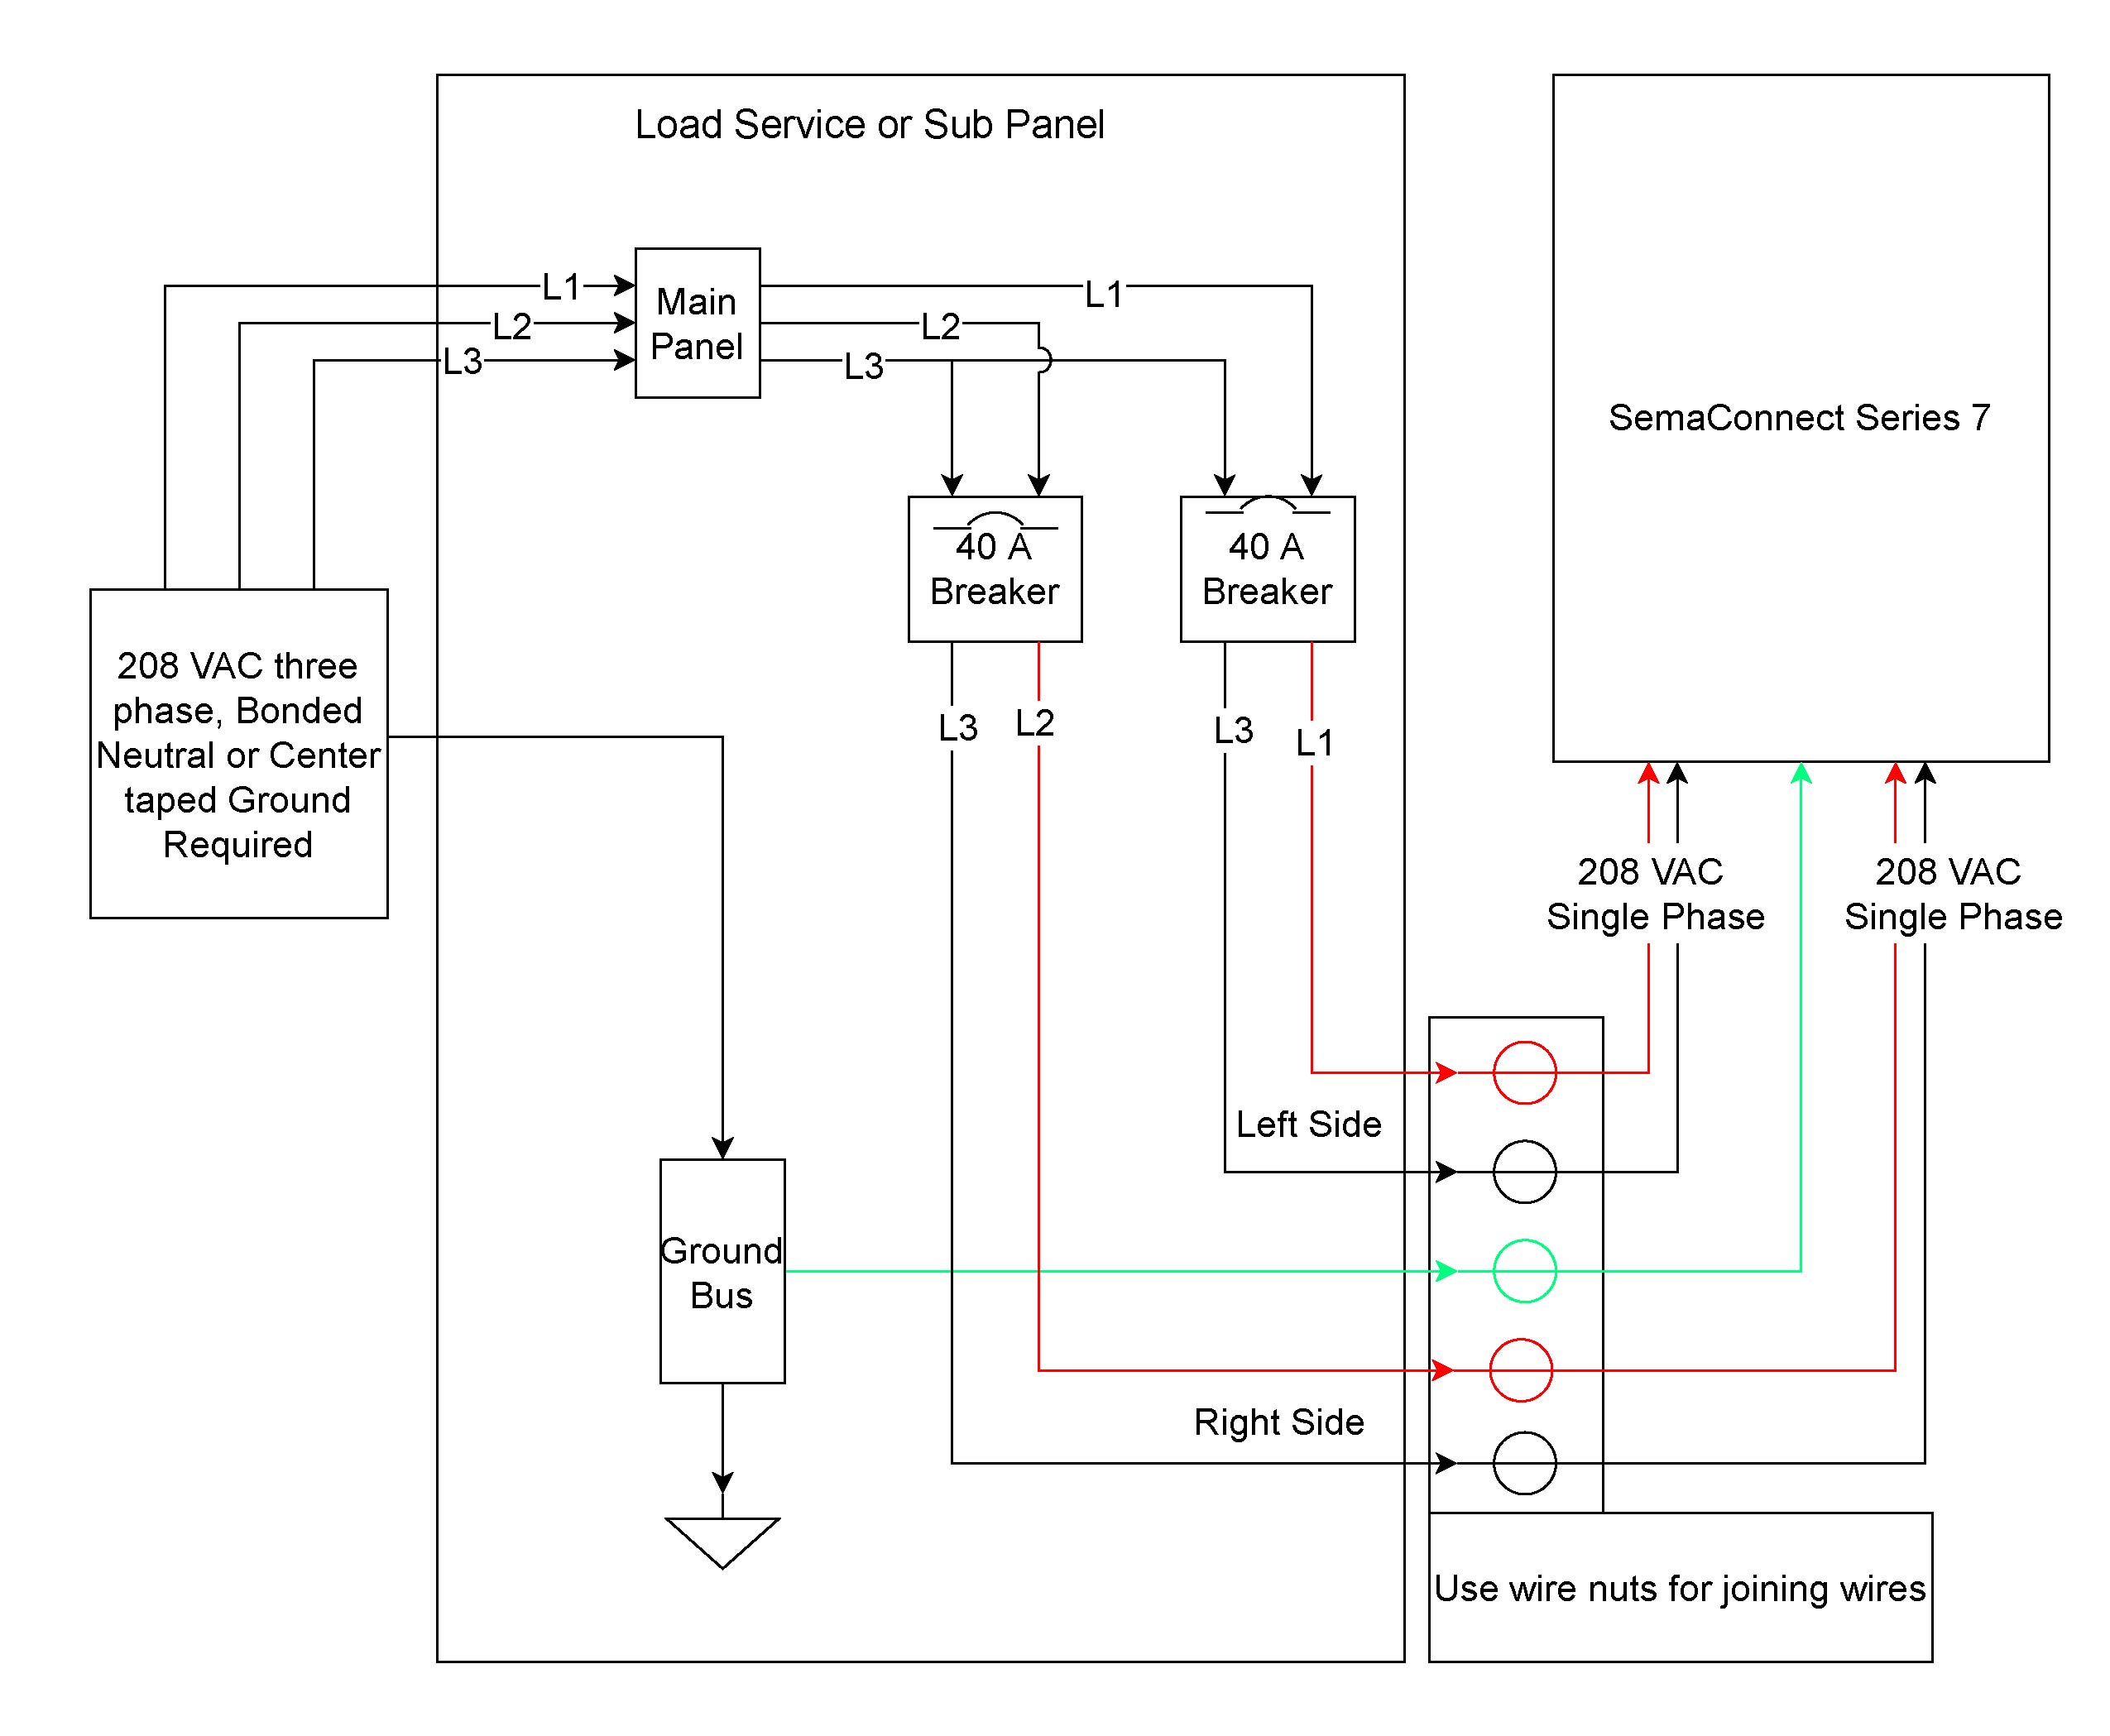 lost plug that goes to radio need wiring diagram on boss bv9150